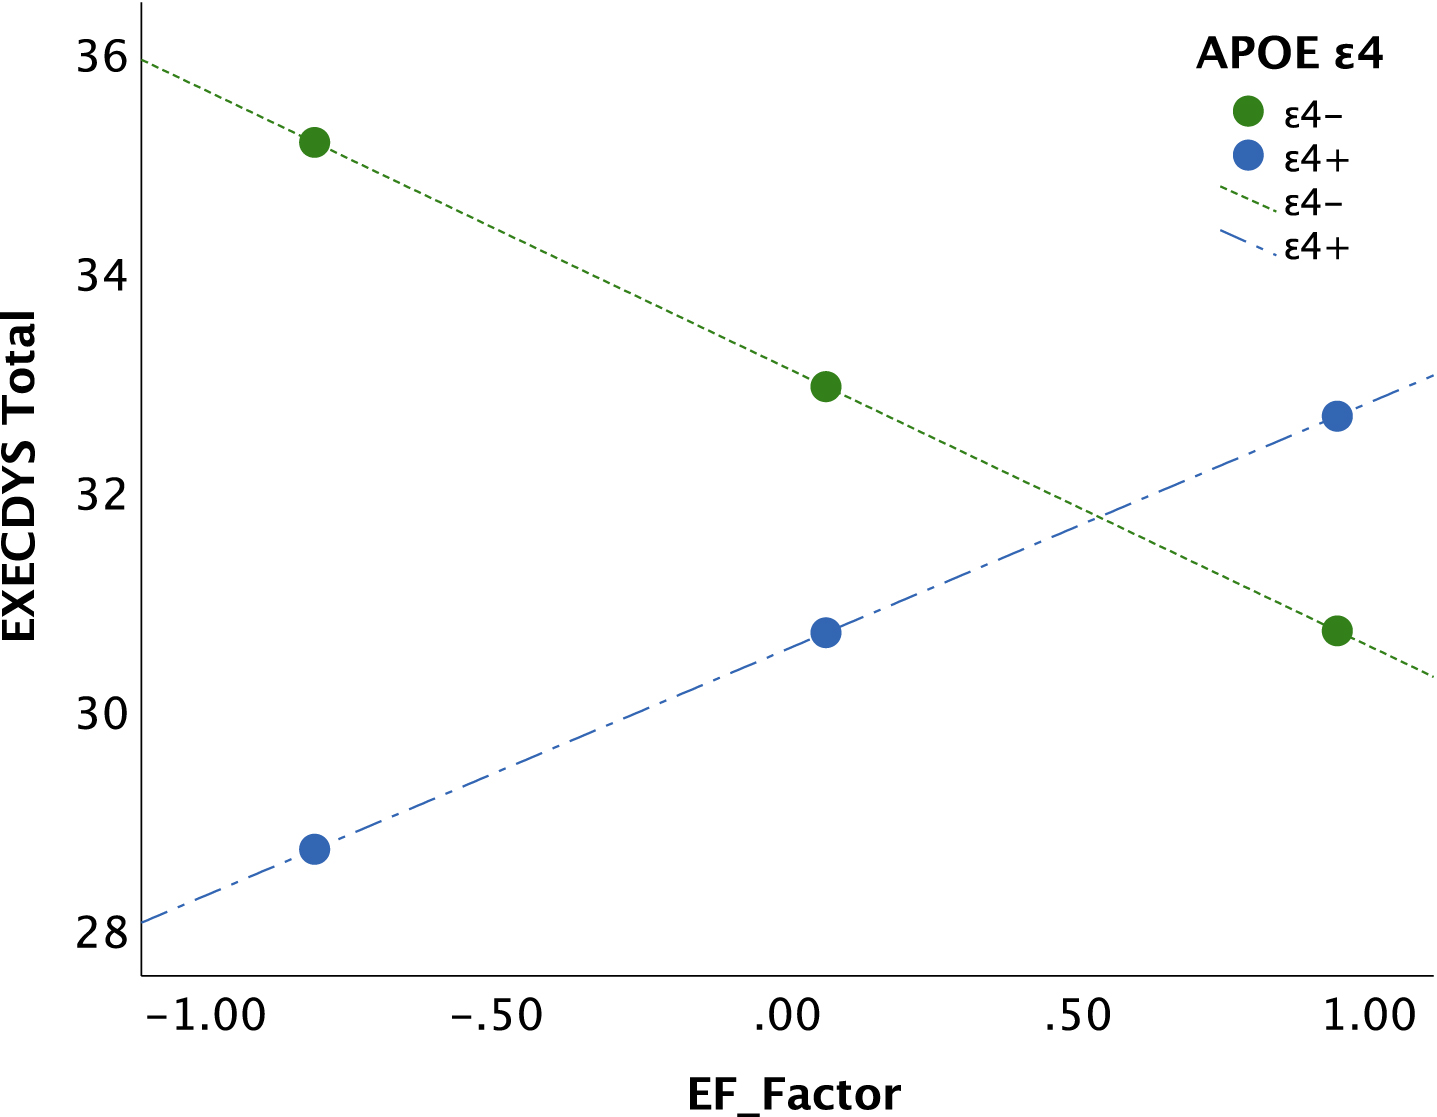 Moderation analysis [simple-slopes analysis via PROCESS; 92] showing the interaction of objectively measured executive functioning (EF_Factor) and APOE ɛ4 group, predicting subjective executive functioning (EXECDYS). Age, depression, and anxiety were covaried. APOE ɛ4 carriers (ɛ4+) were less accurate in identifying executive concerns than ɛ4 non-carriers (ɛ4-). Specifically, in ɛ4-, perceived executive dysfunction was greater in those with poorer objective executive functioning, while in ɛ4+, the opposite pattern was evident; perceived executive dysfunction was lower in those with poorer objective executive functioning.